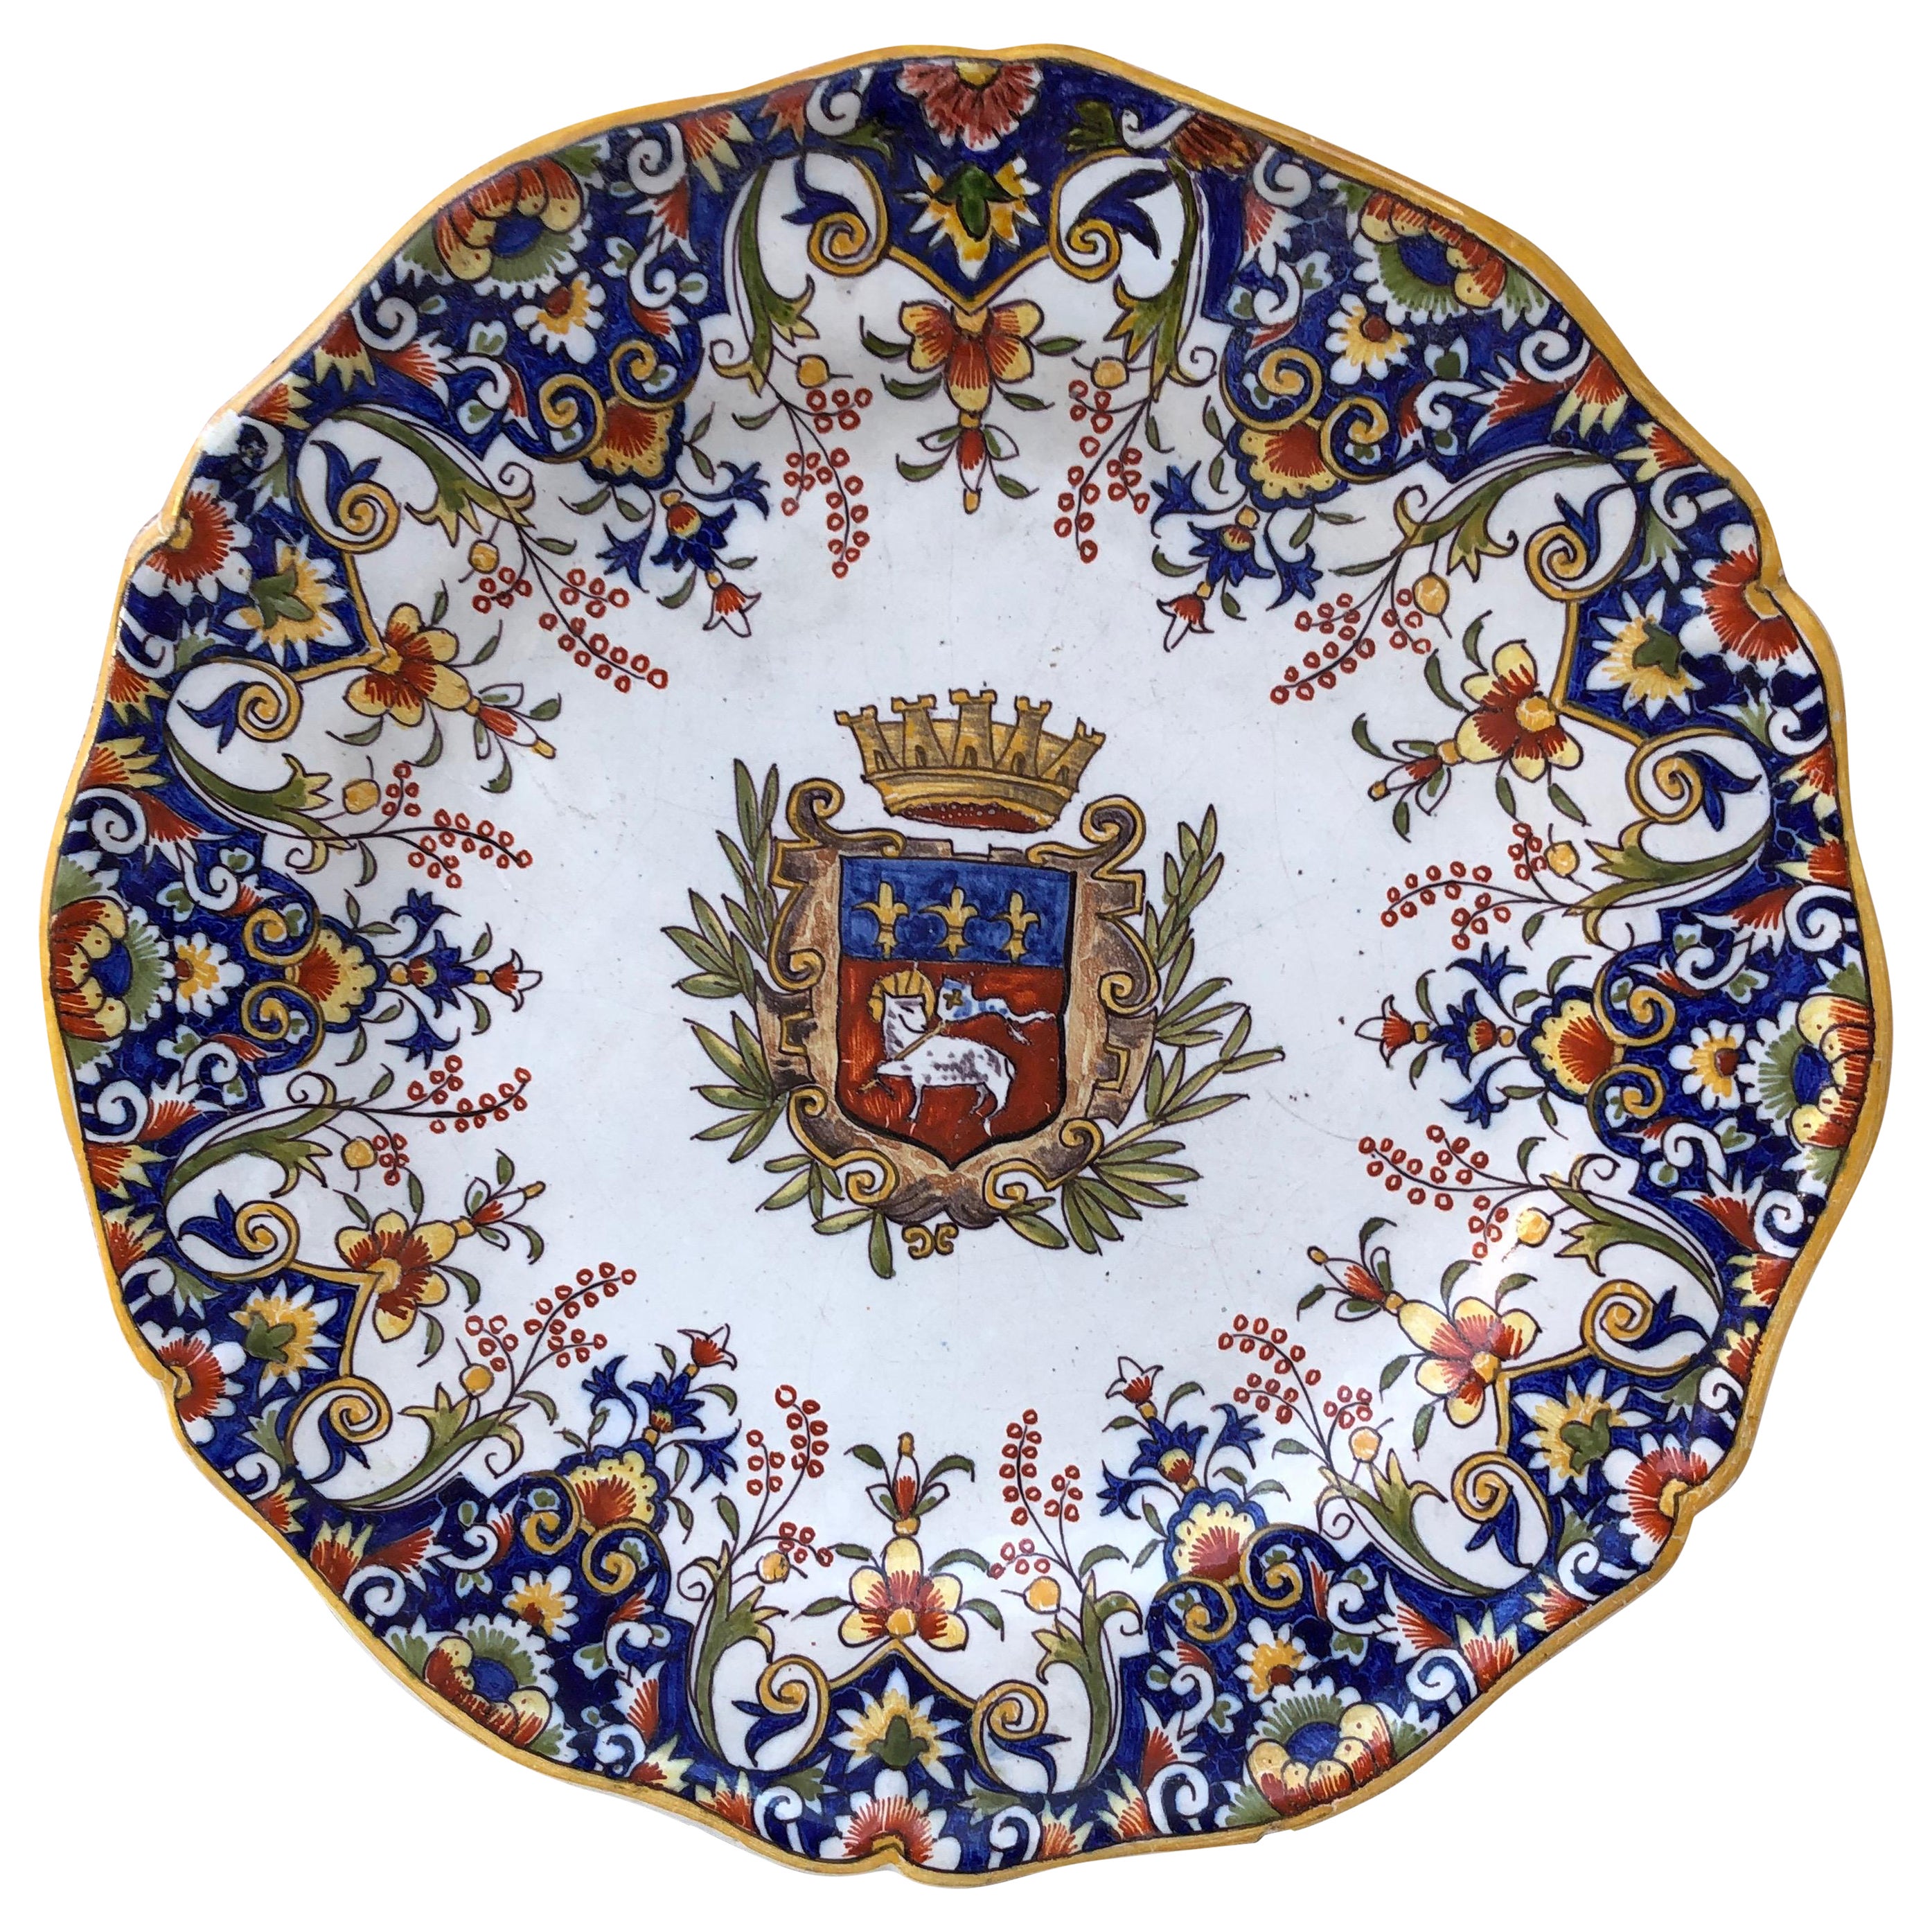 19th Century Large French Faience Platter with Armoiries Desvres